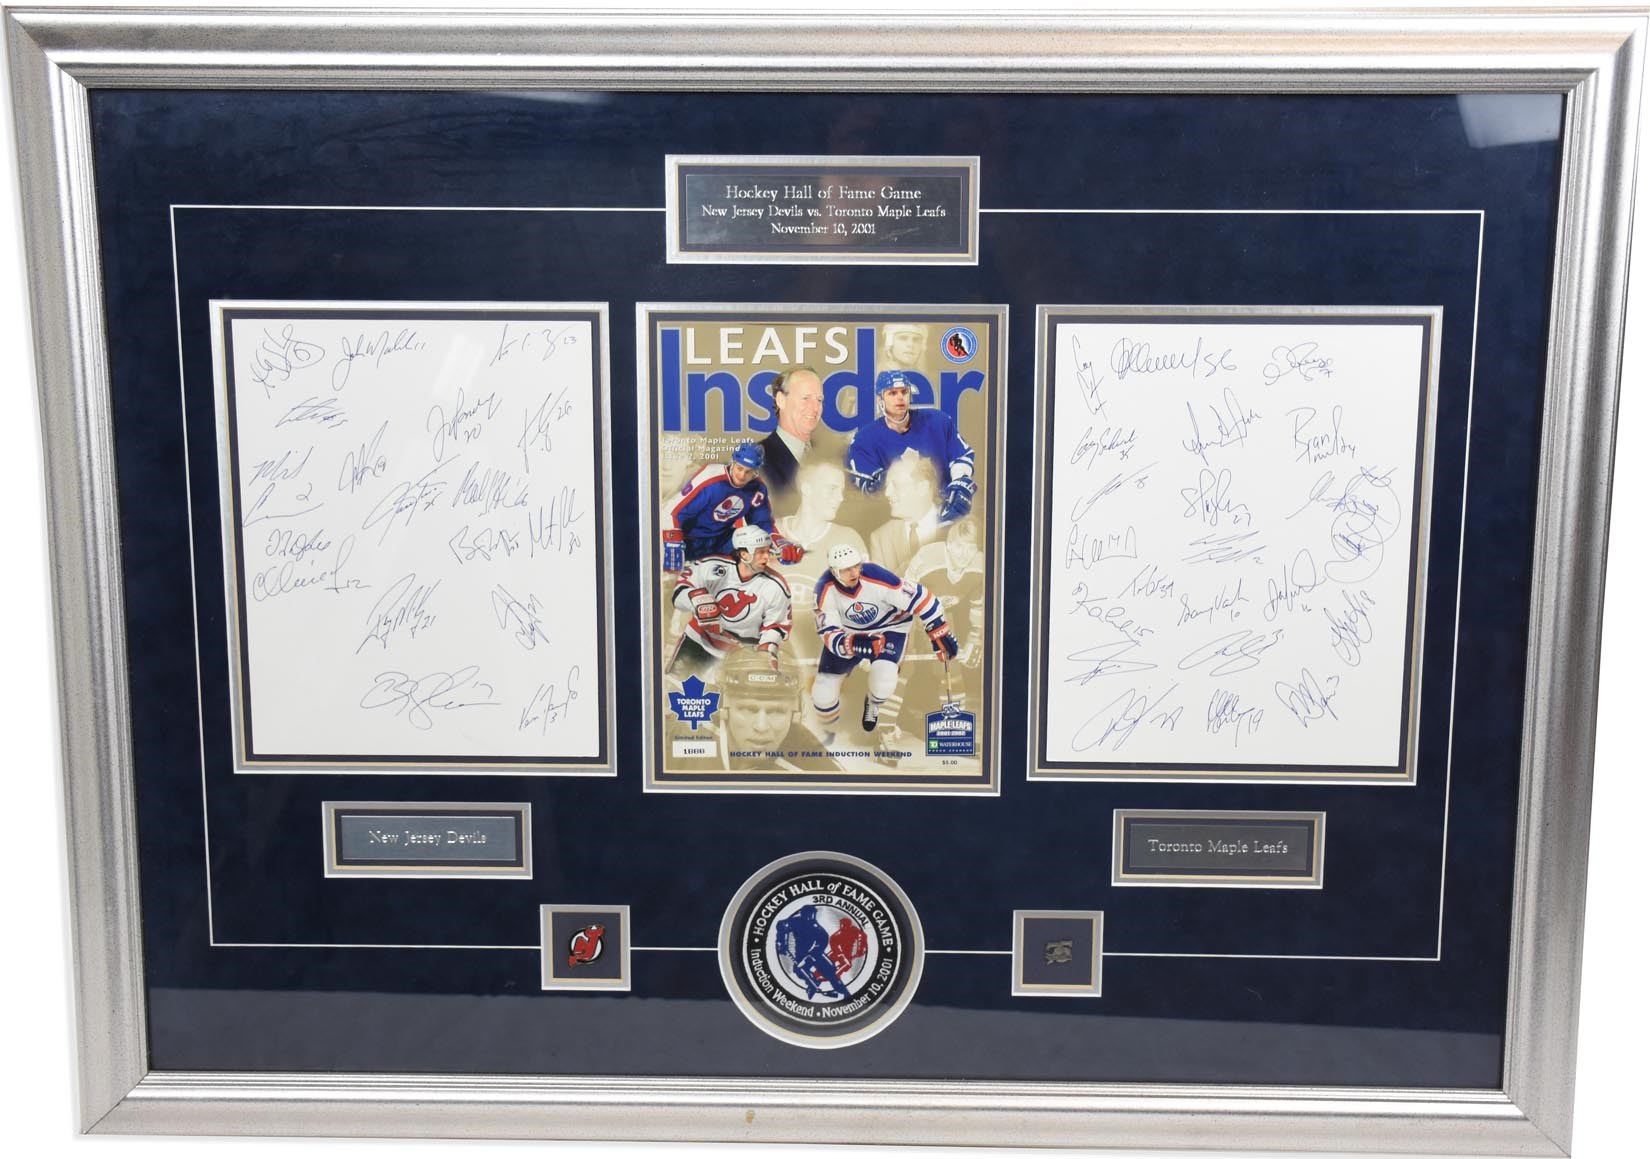 2001 Hockey Hall of Fame Game Signed Display Presented to Craig Patrick